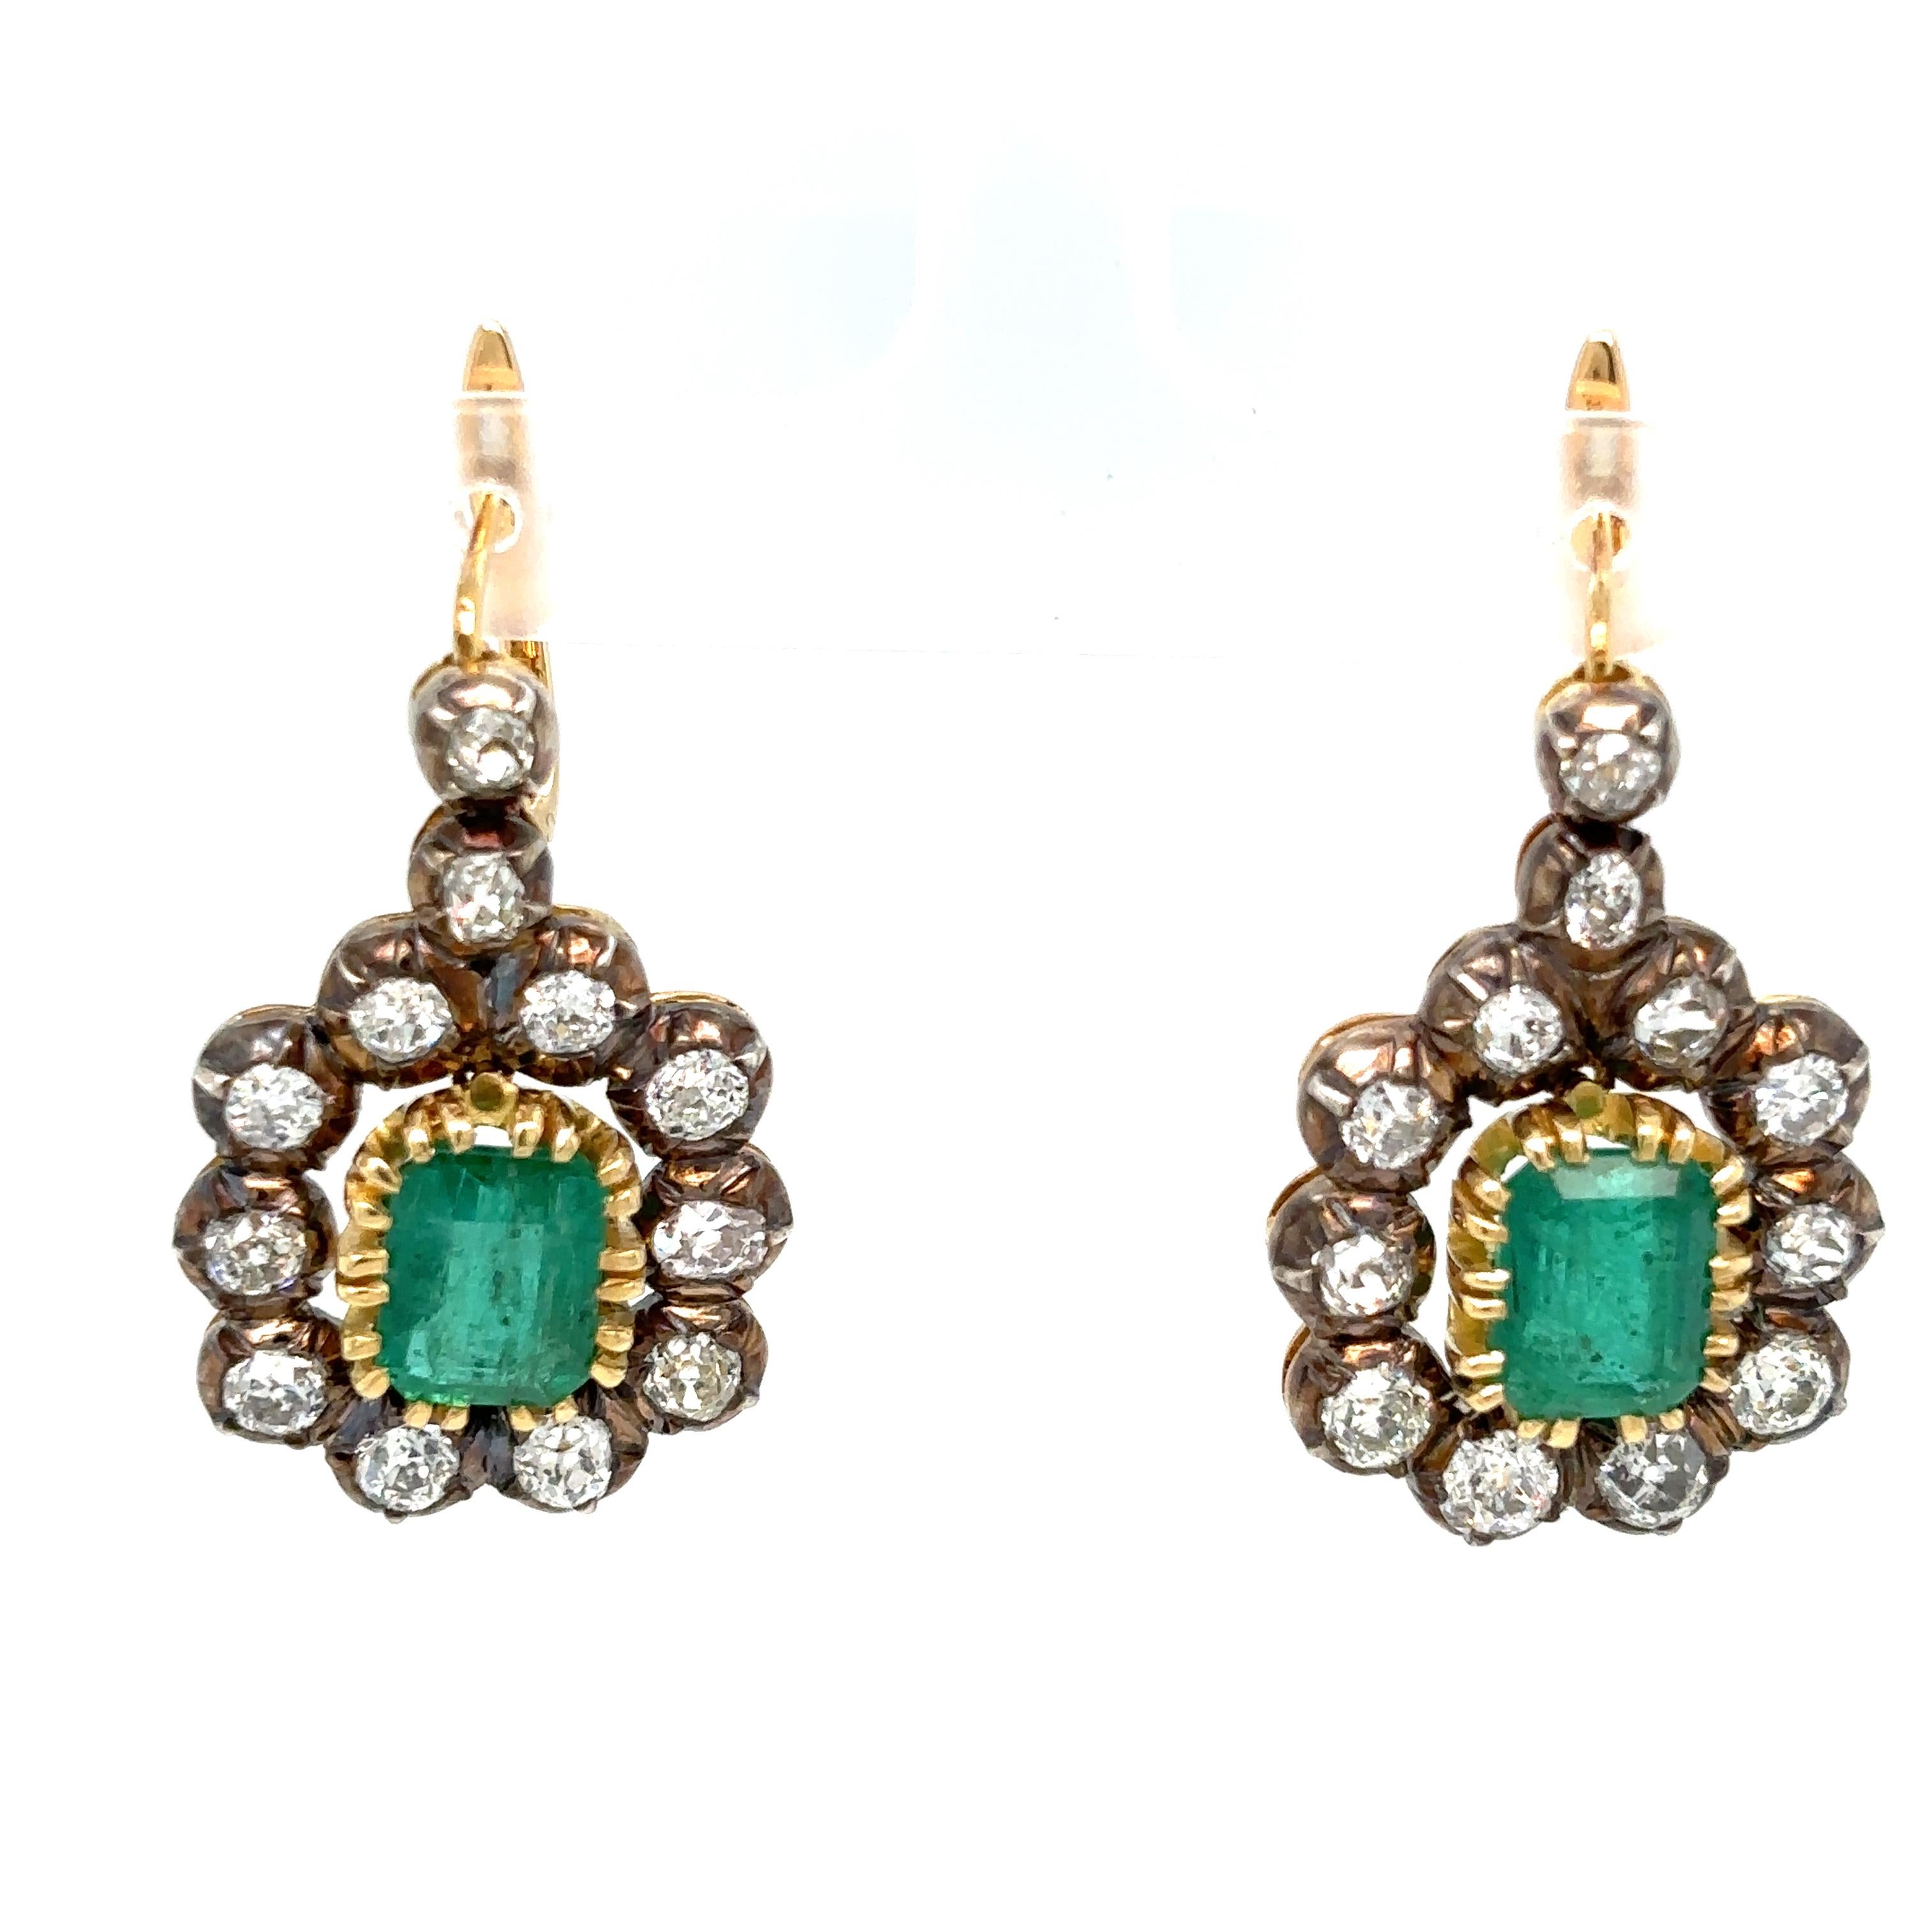 These Victorian emerald & diamond 18k white gold and silver earrings feature 2 Natural Emeralds, weighing 2.79 + 2.26 ct, and sparkling old Mine cut diamonds weighing 4,40 ct. graded H color with VS clarity.
Circa 1900

CONDITION: Pre-owned -